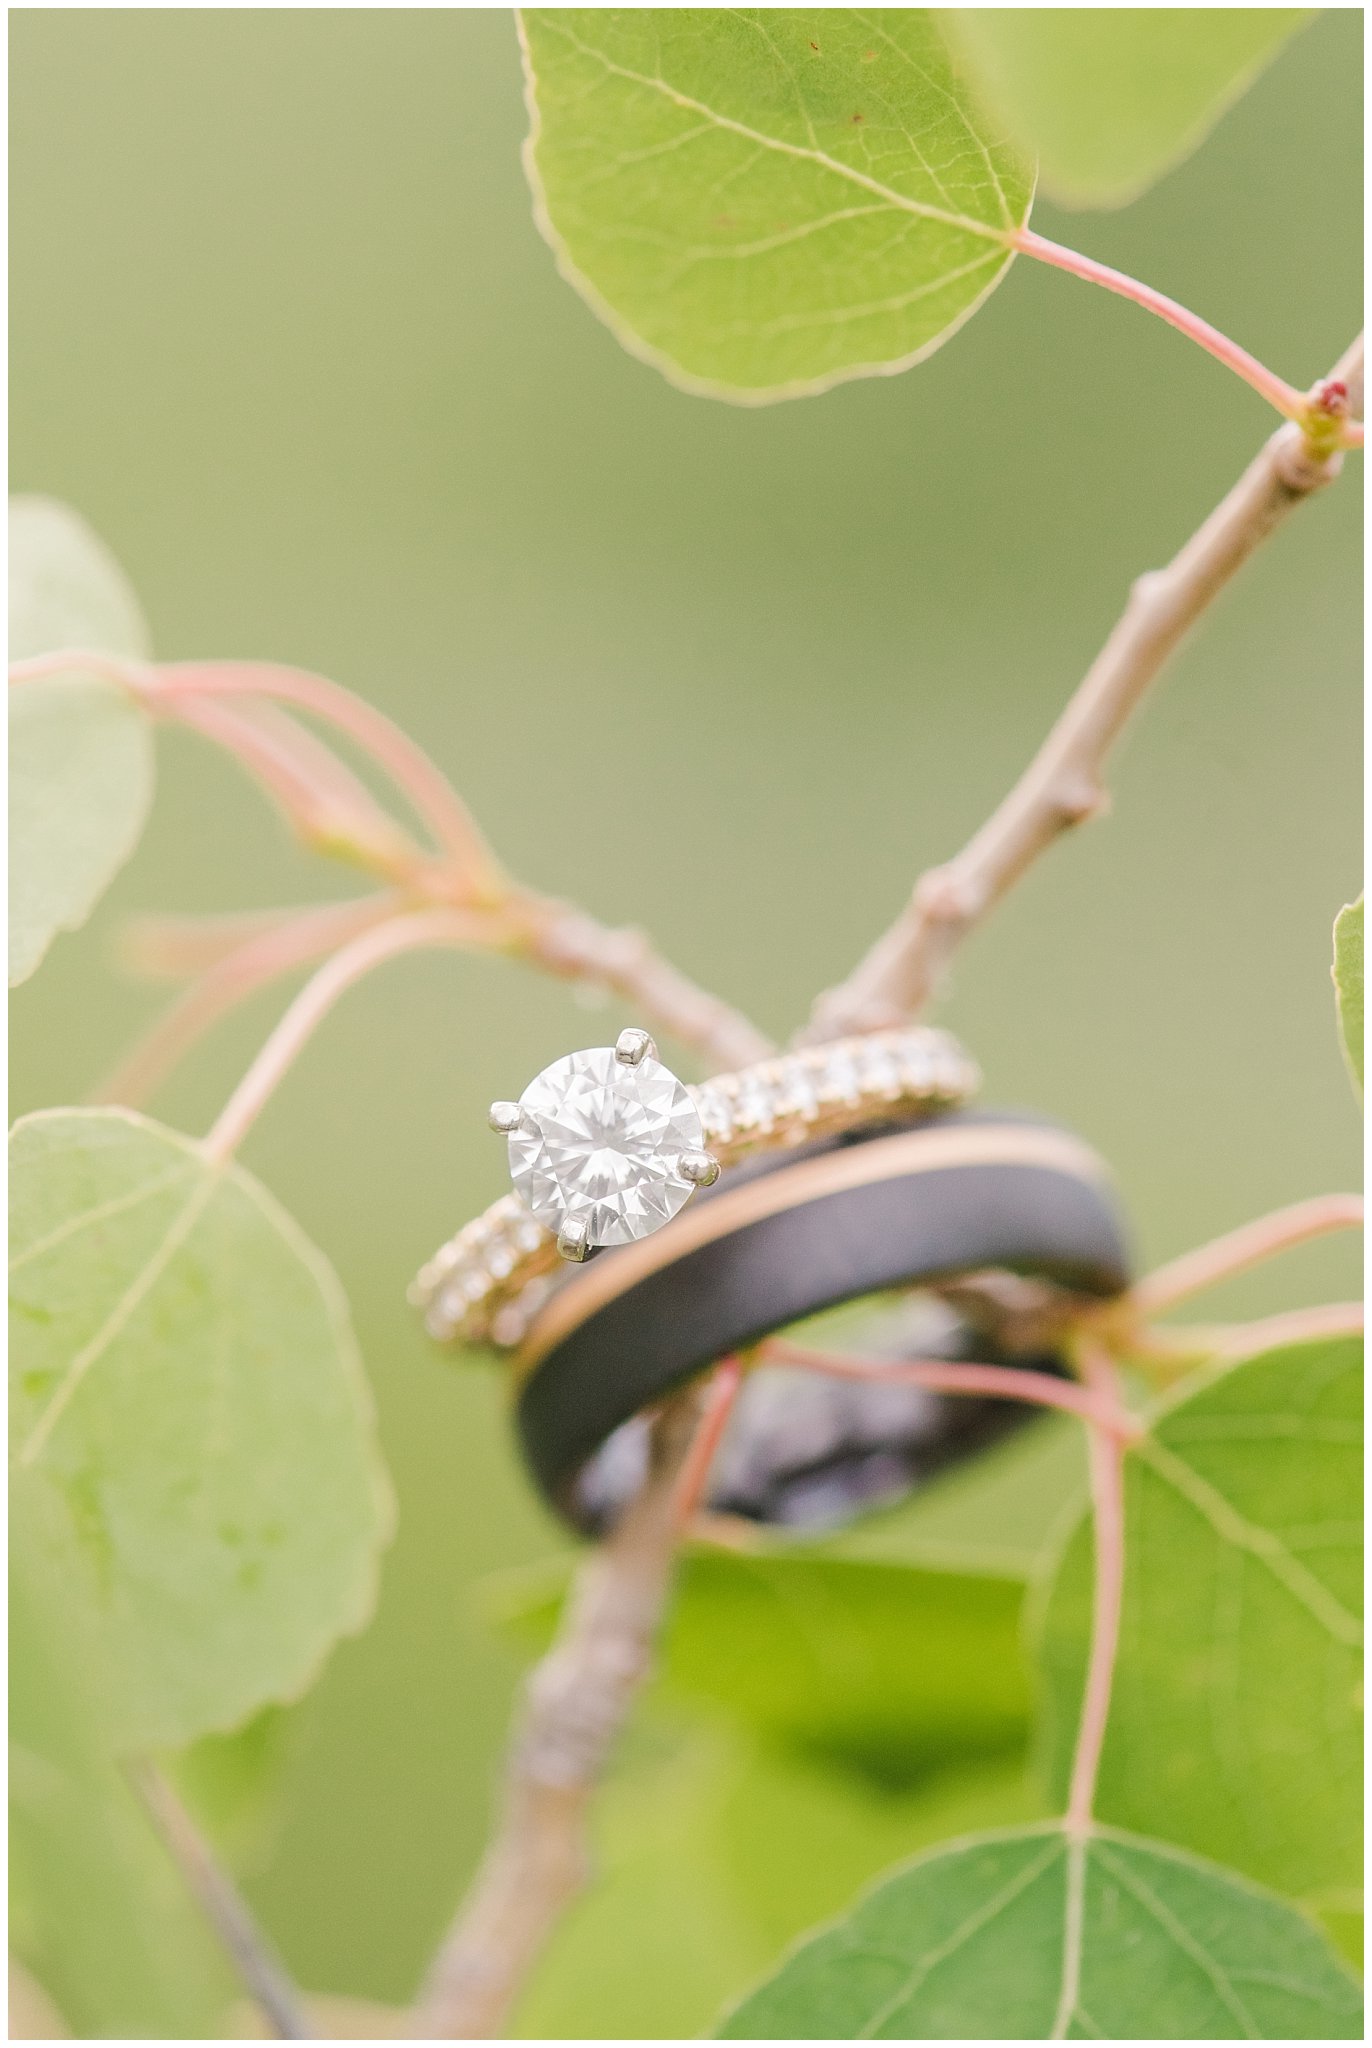 Wedding ring on the leaves of an aspen tree | Utah Mountain Wedding Formal Session | Tibble Fork Summer Formal Session | Jessie and Dallin Photography